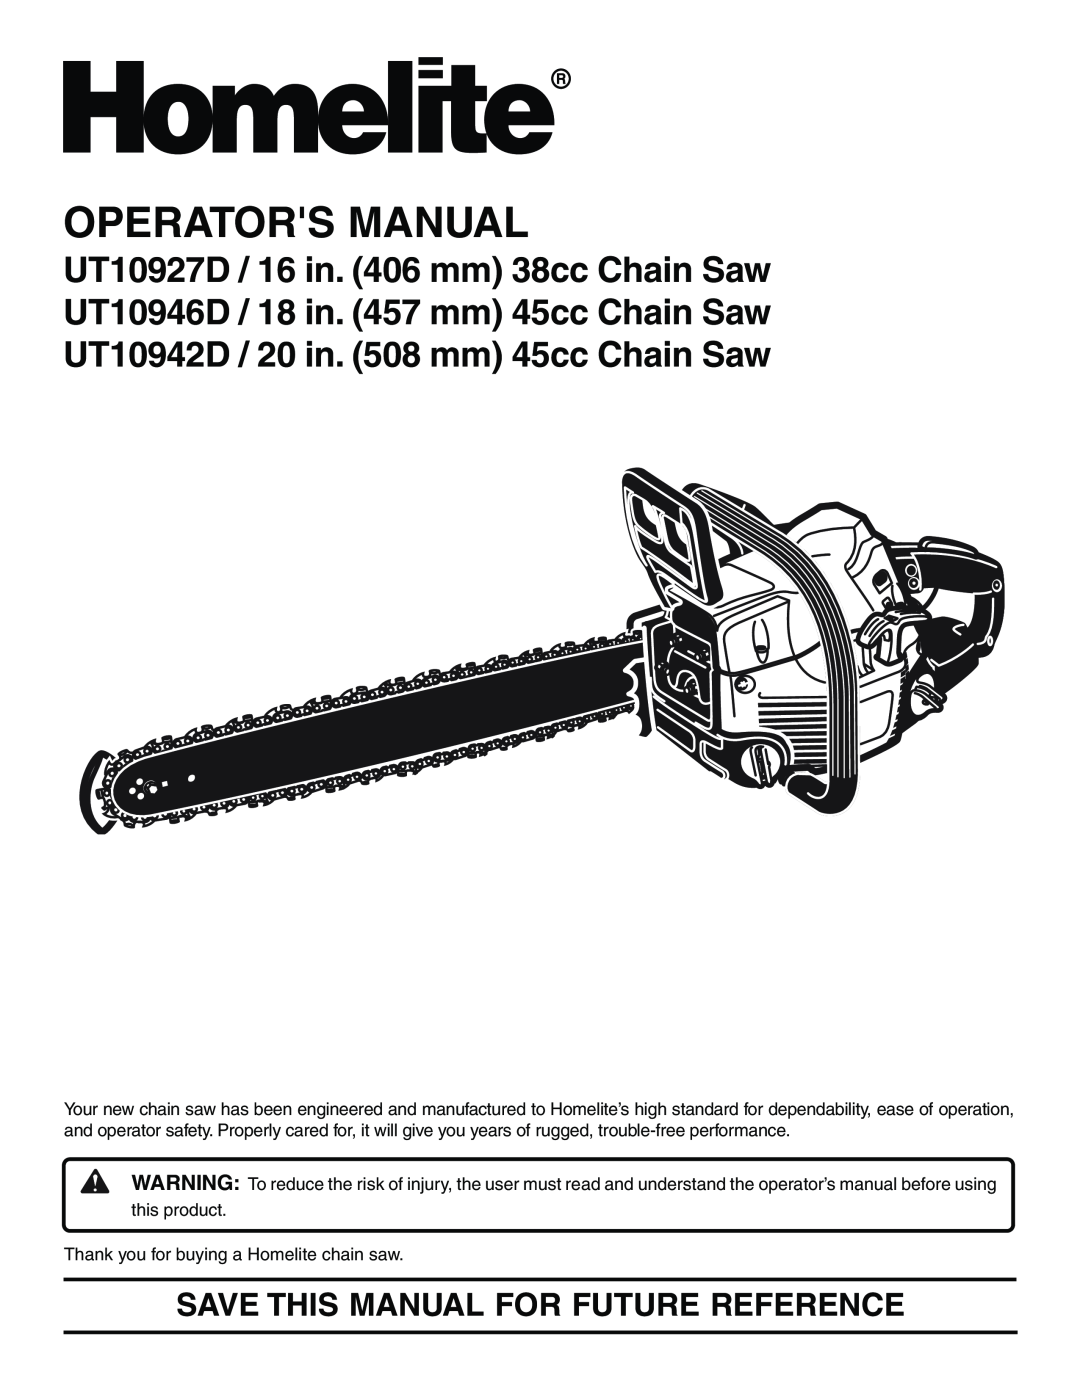 Homelite UT10942D manual Operators Manual, Save This Manual For Future Reference, UT10927D / 16 in. 406 mm 38cc Chain Saw 